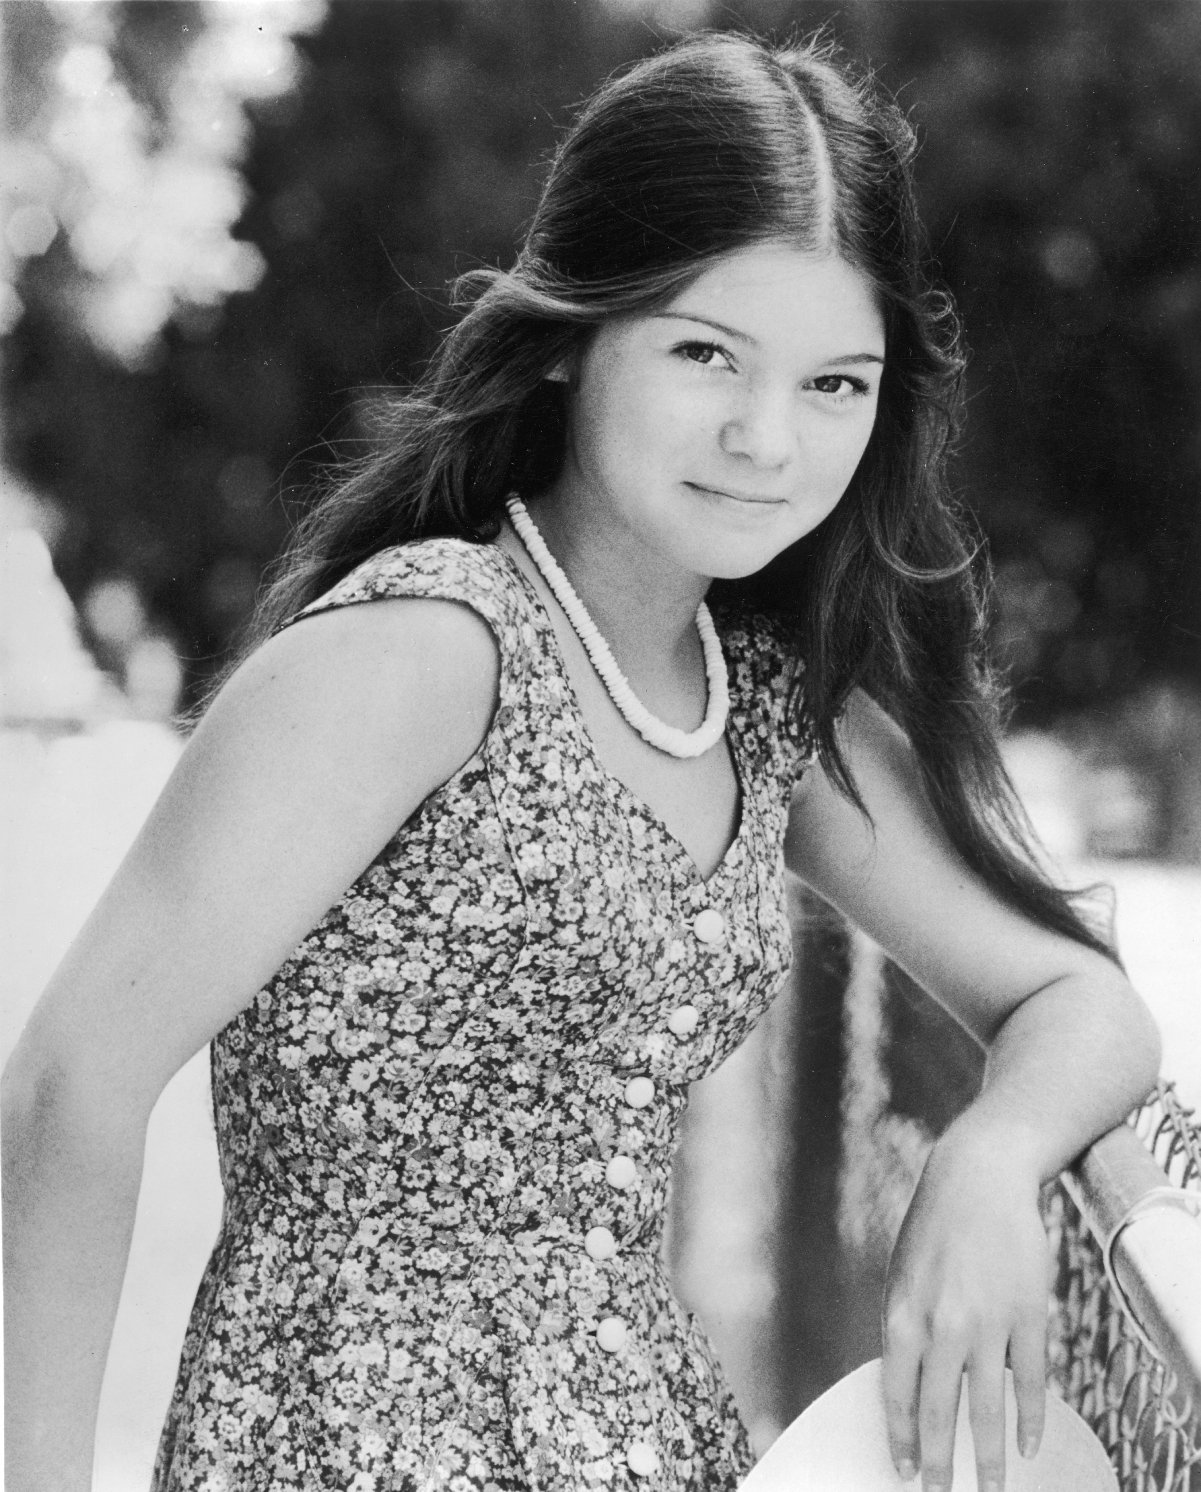 'One Day at a Time' actor Valerie Bertinelli smiling in a floral dress in 1975, age 15